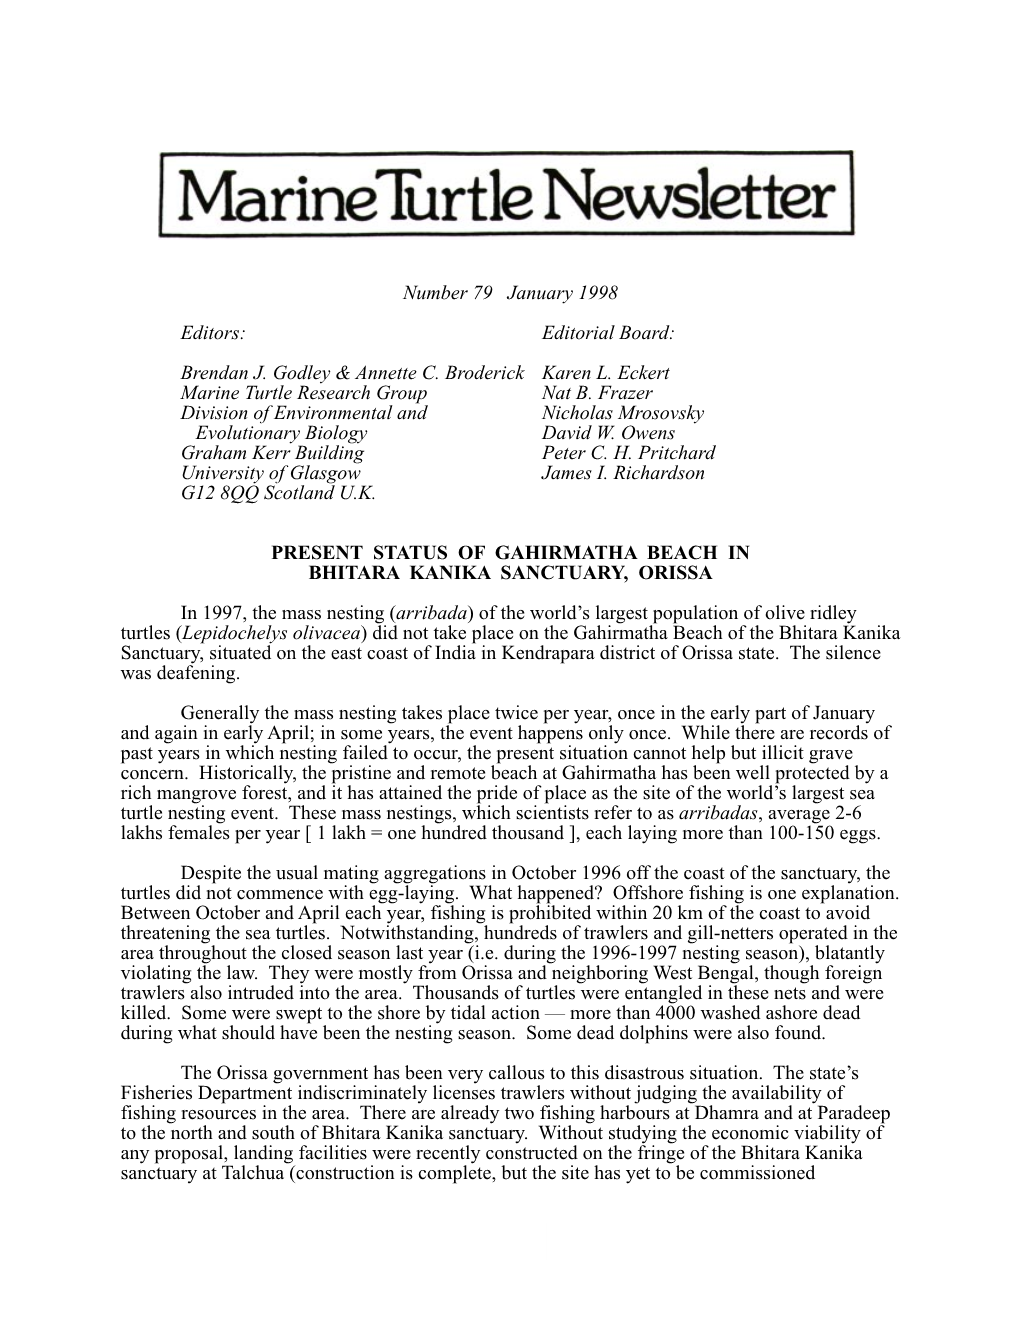 Marine Turtle Newsletter, 1998, No. 80 - 1 Because a Case Is Pending in the Orissa High Court)